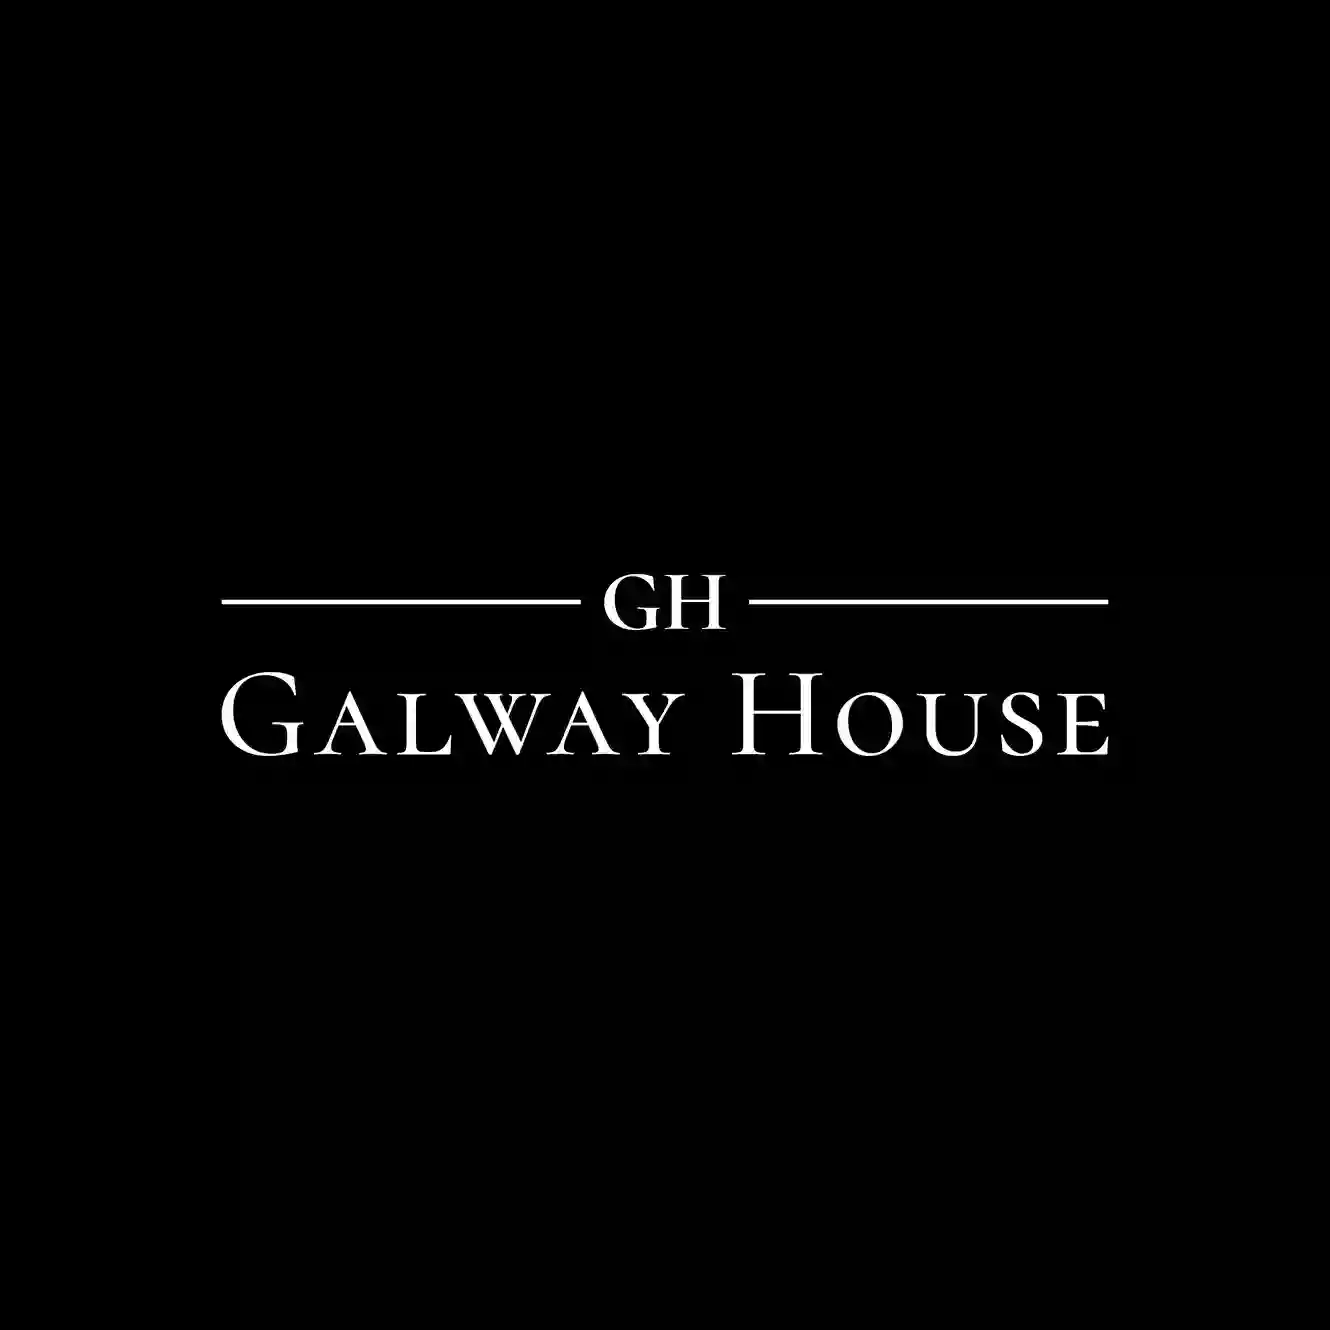 Galway House